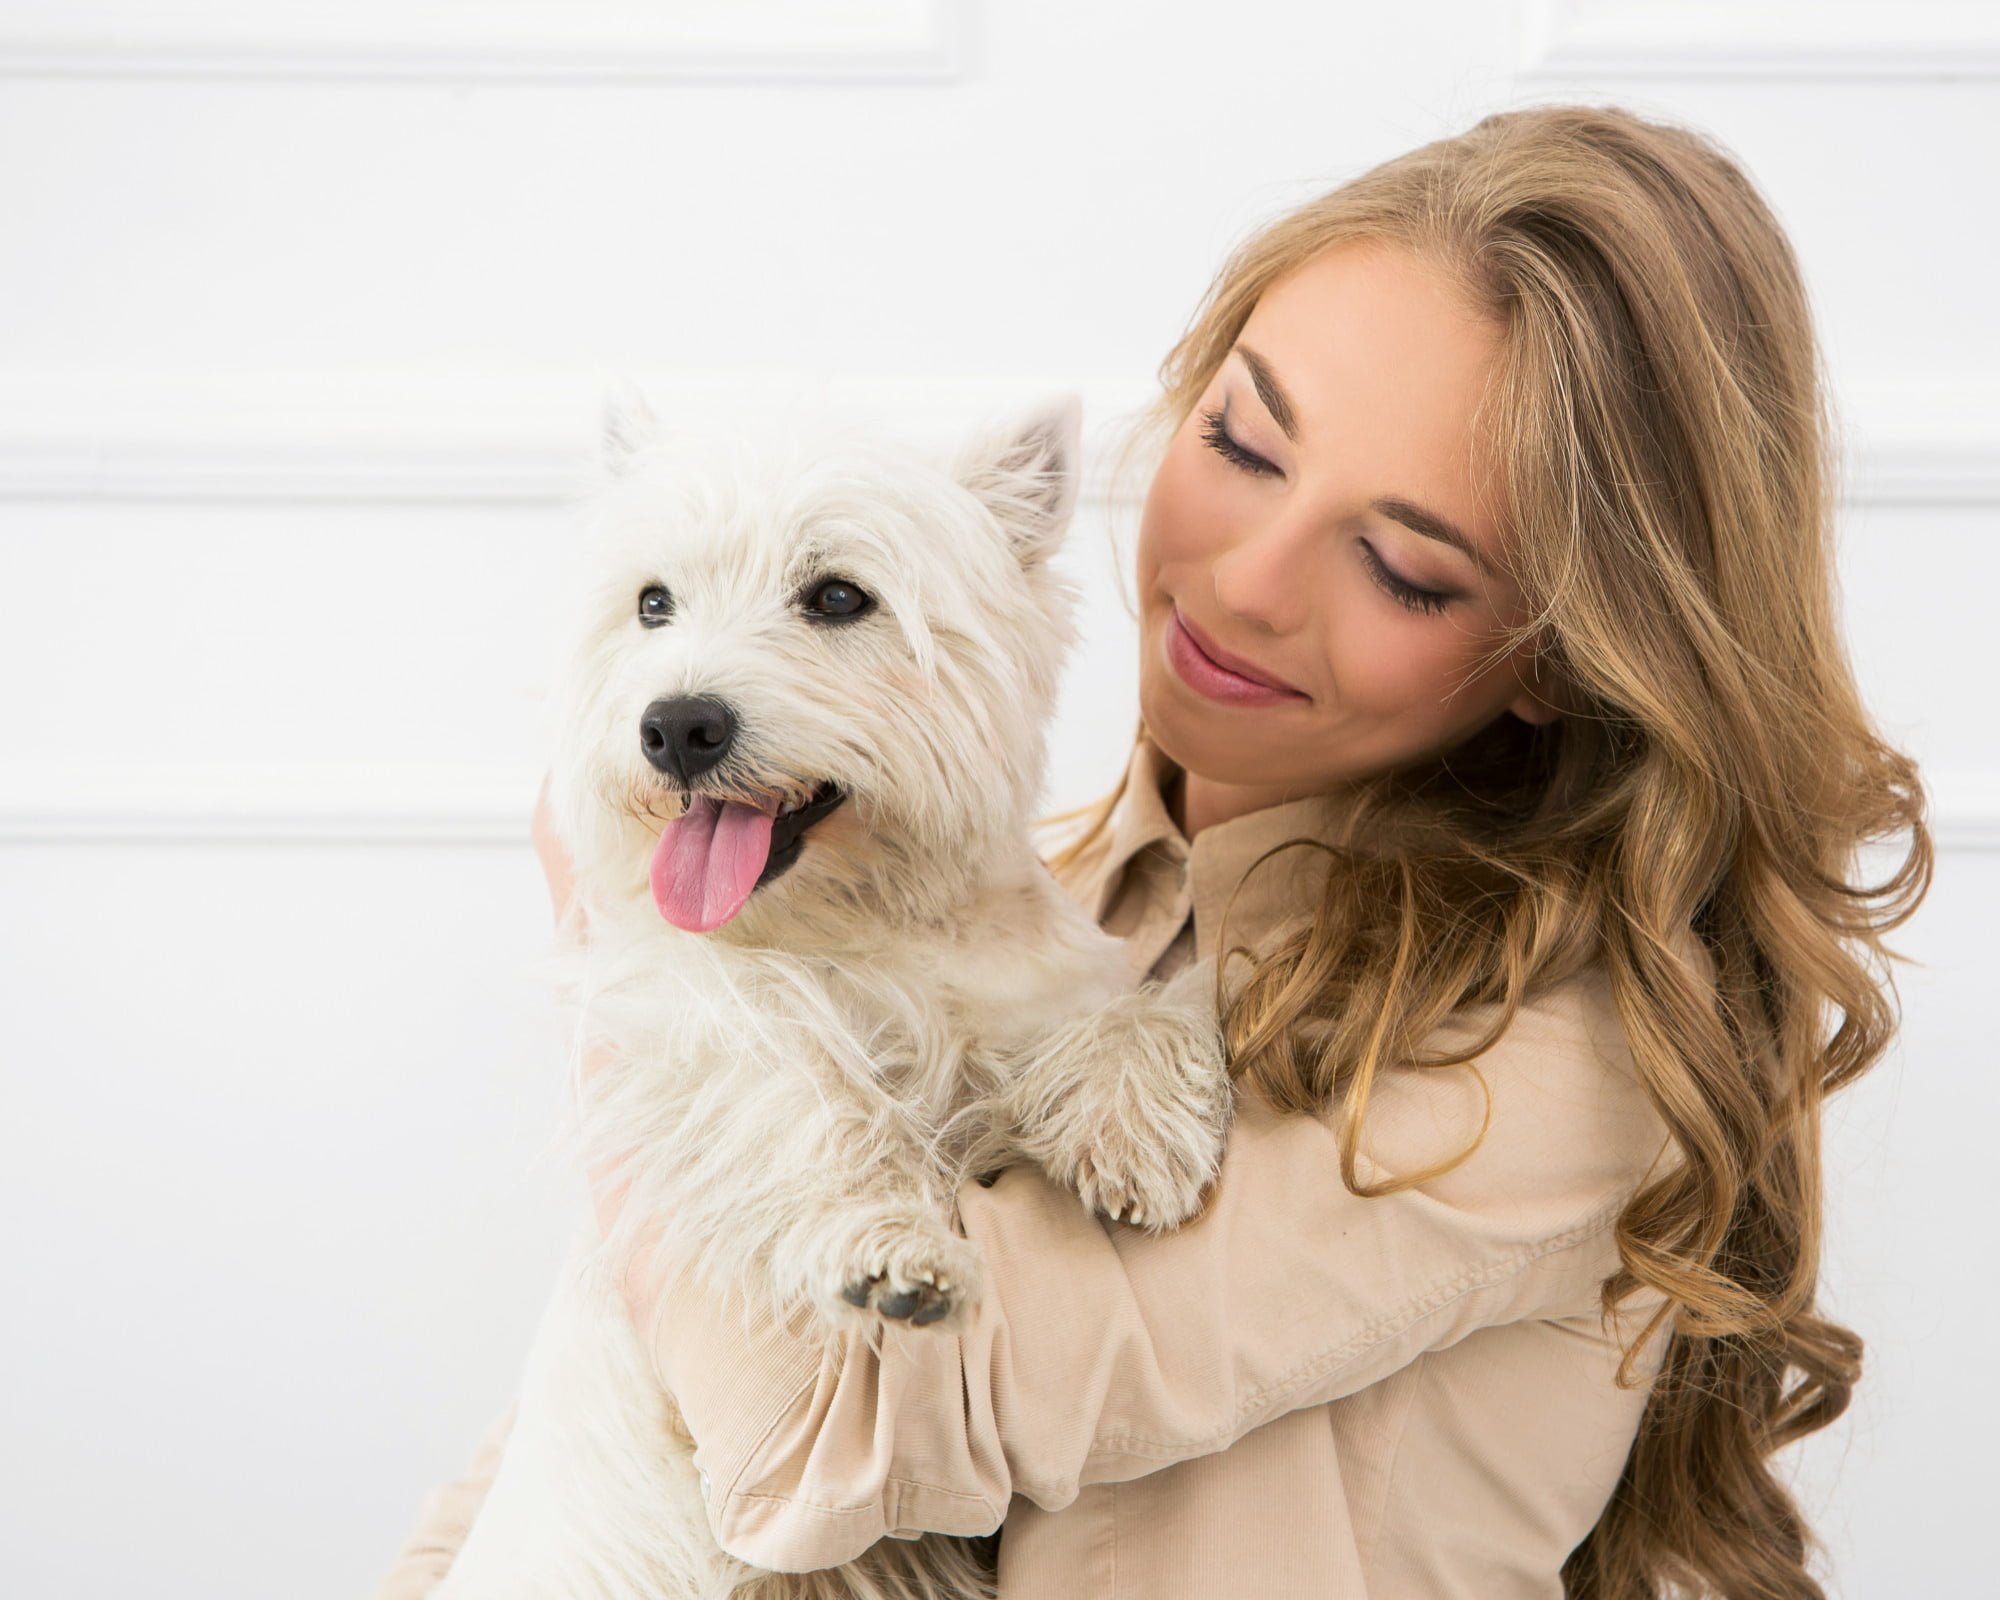 young woman pet sitter with small white fluffy dog